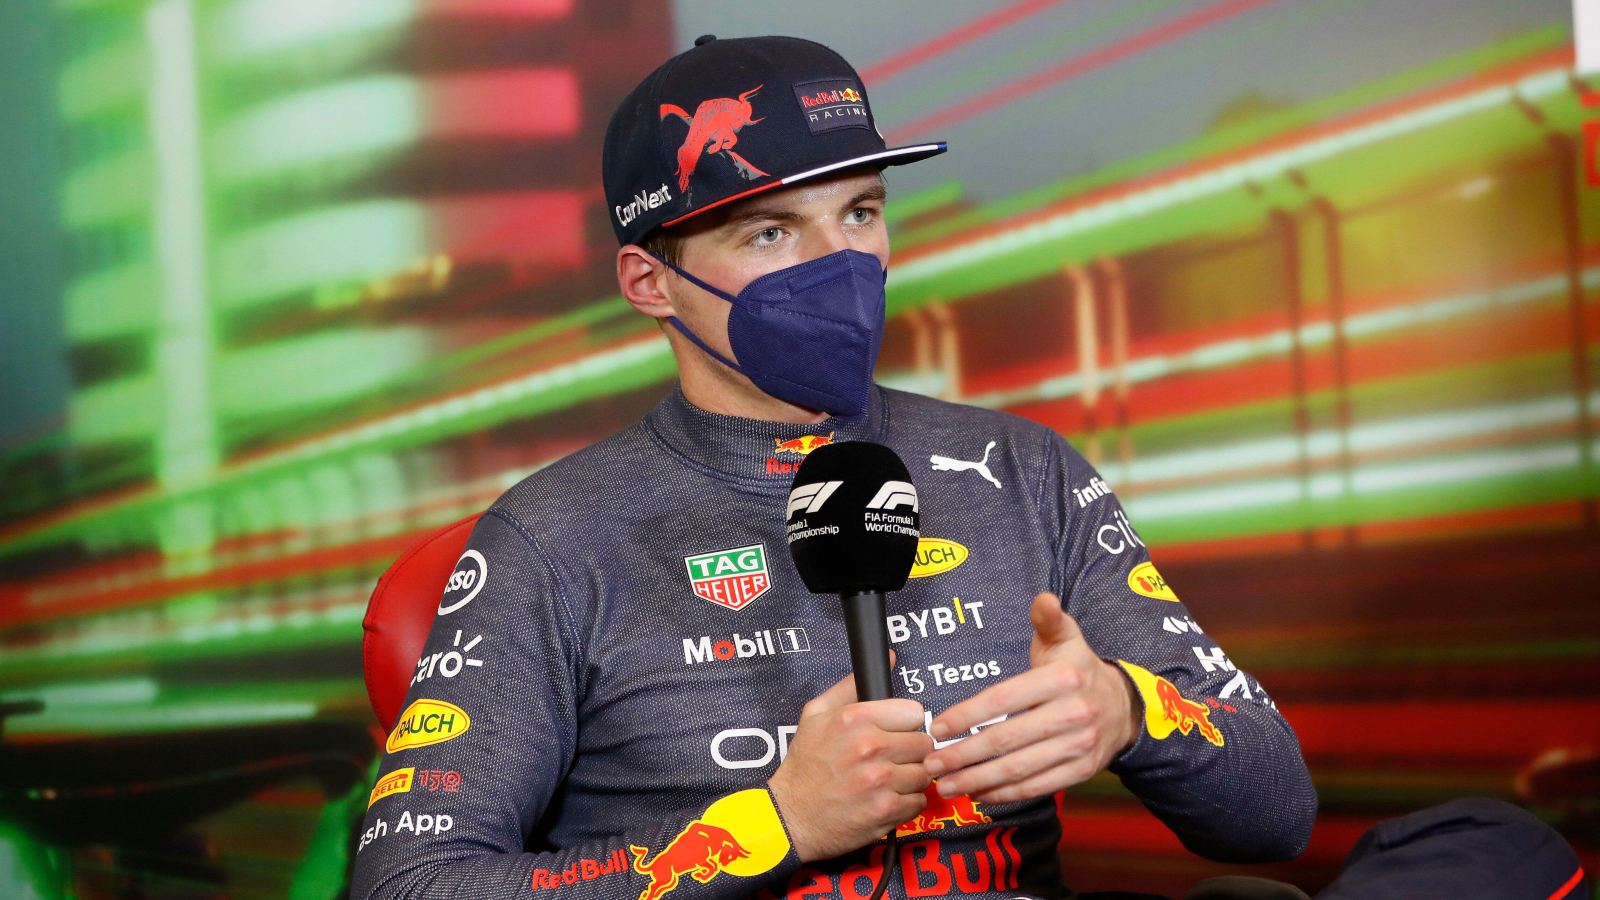 Max Verstappen speaks into a microphone. Imola, April 2022.